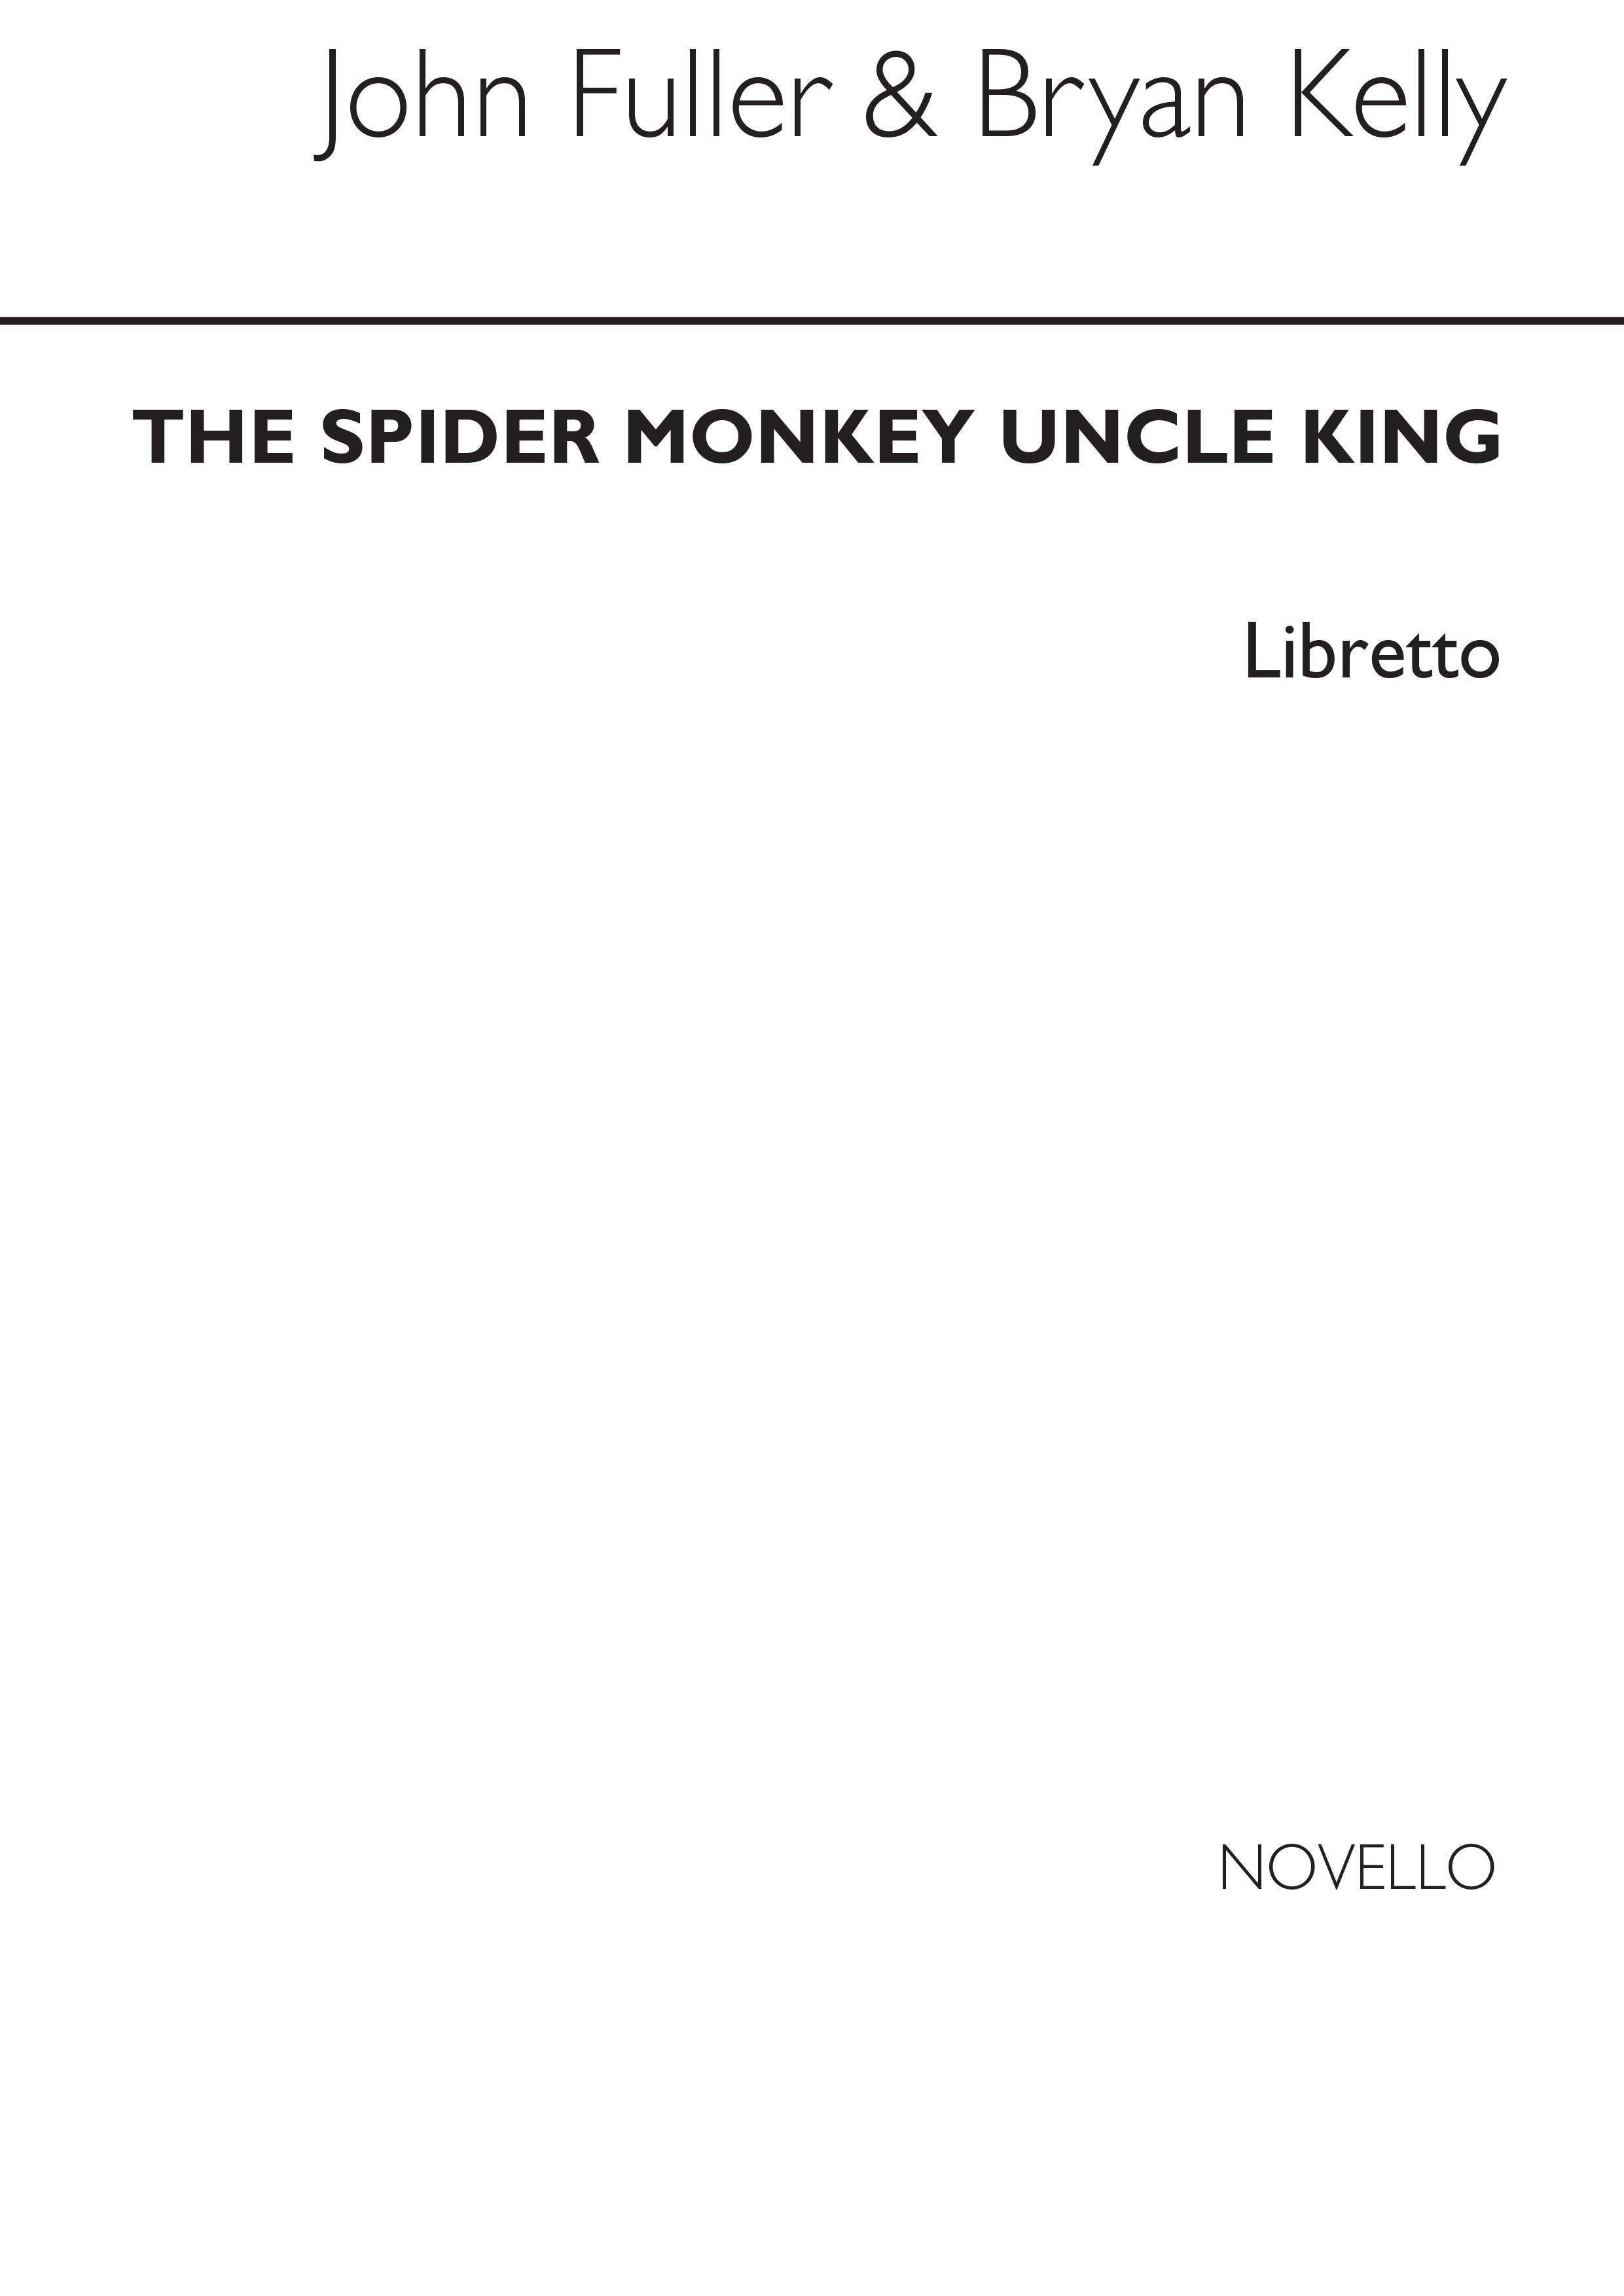 Bryan Kelly: Spider Monkey Uncle King (Libretto)